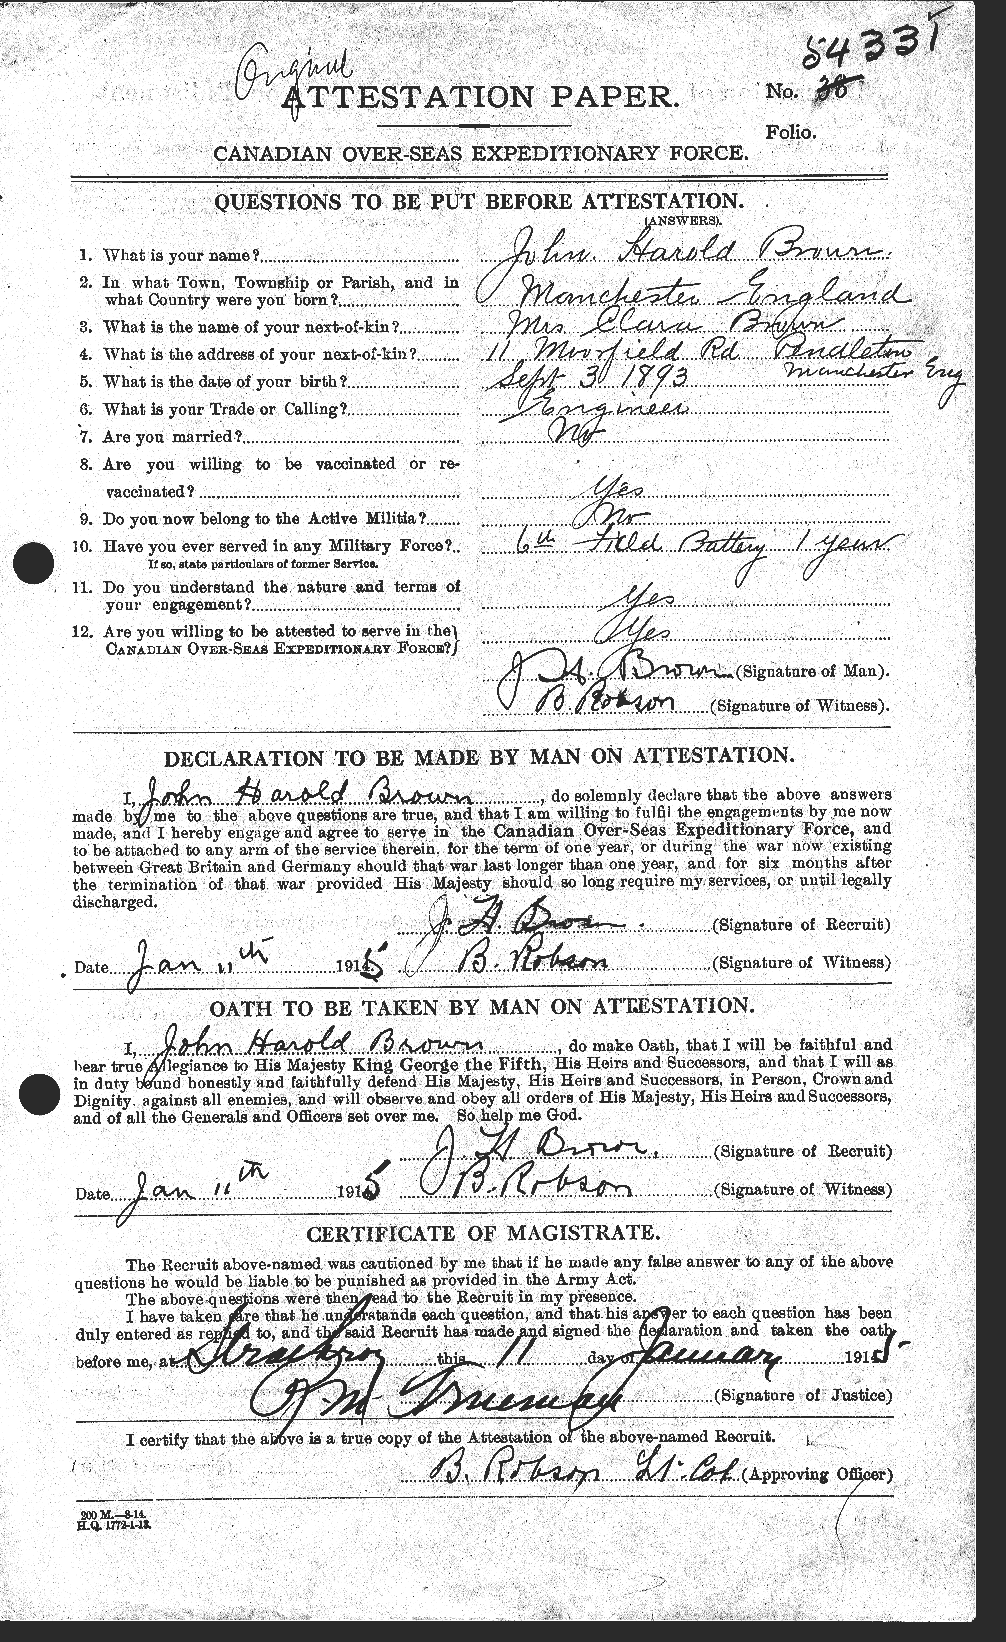 Personnel Records of the First World War - CEF 264607a